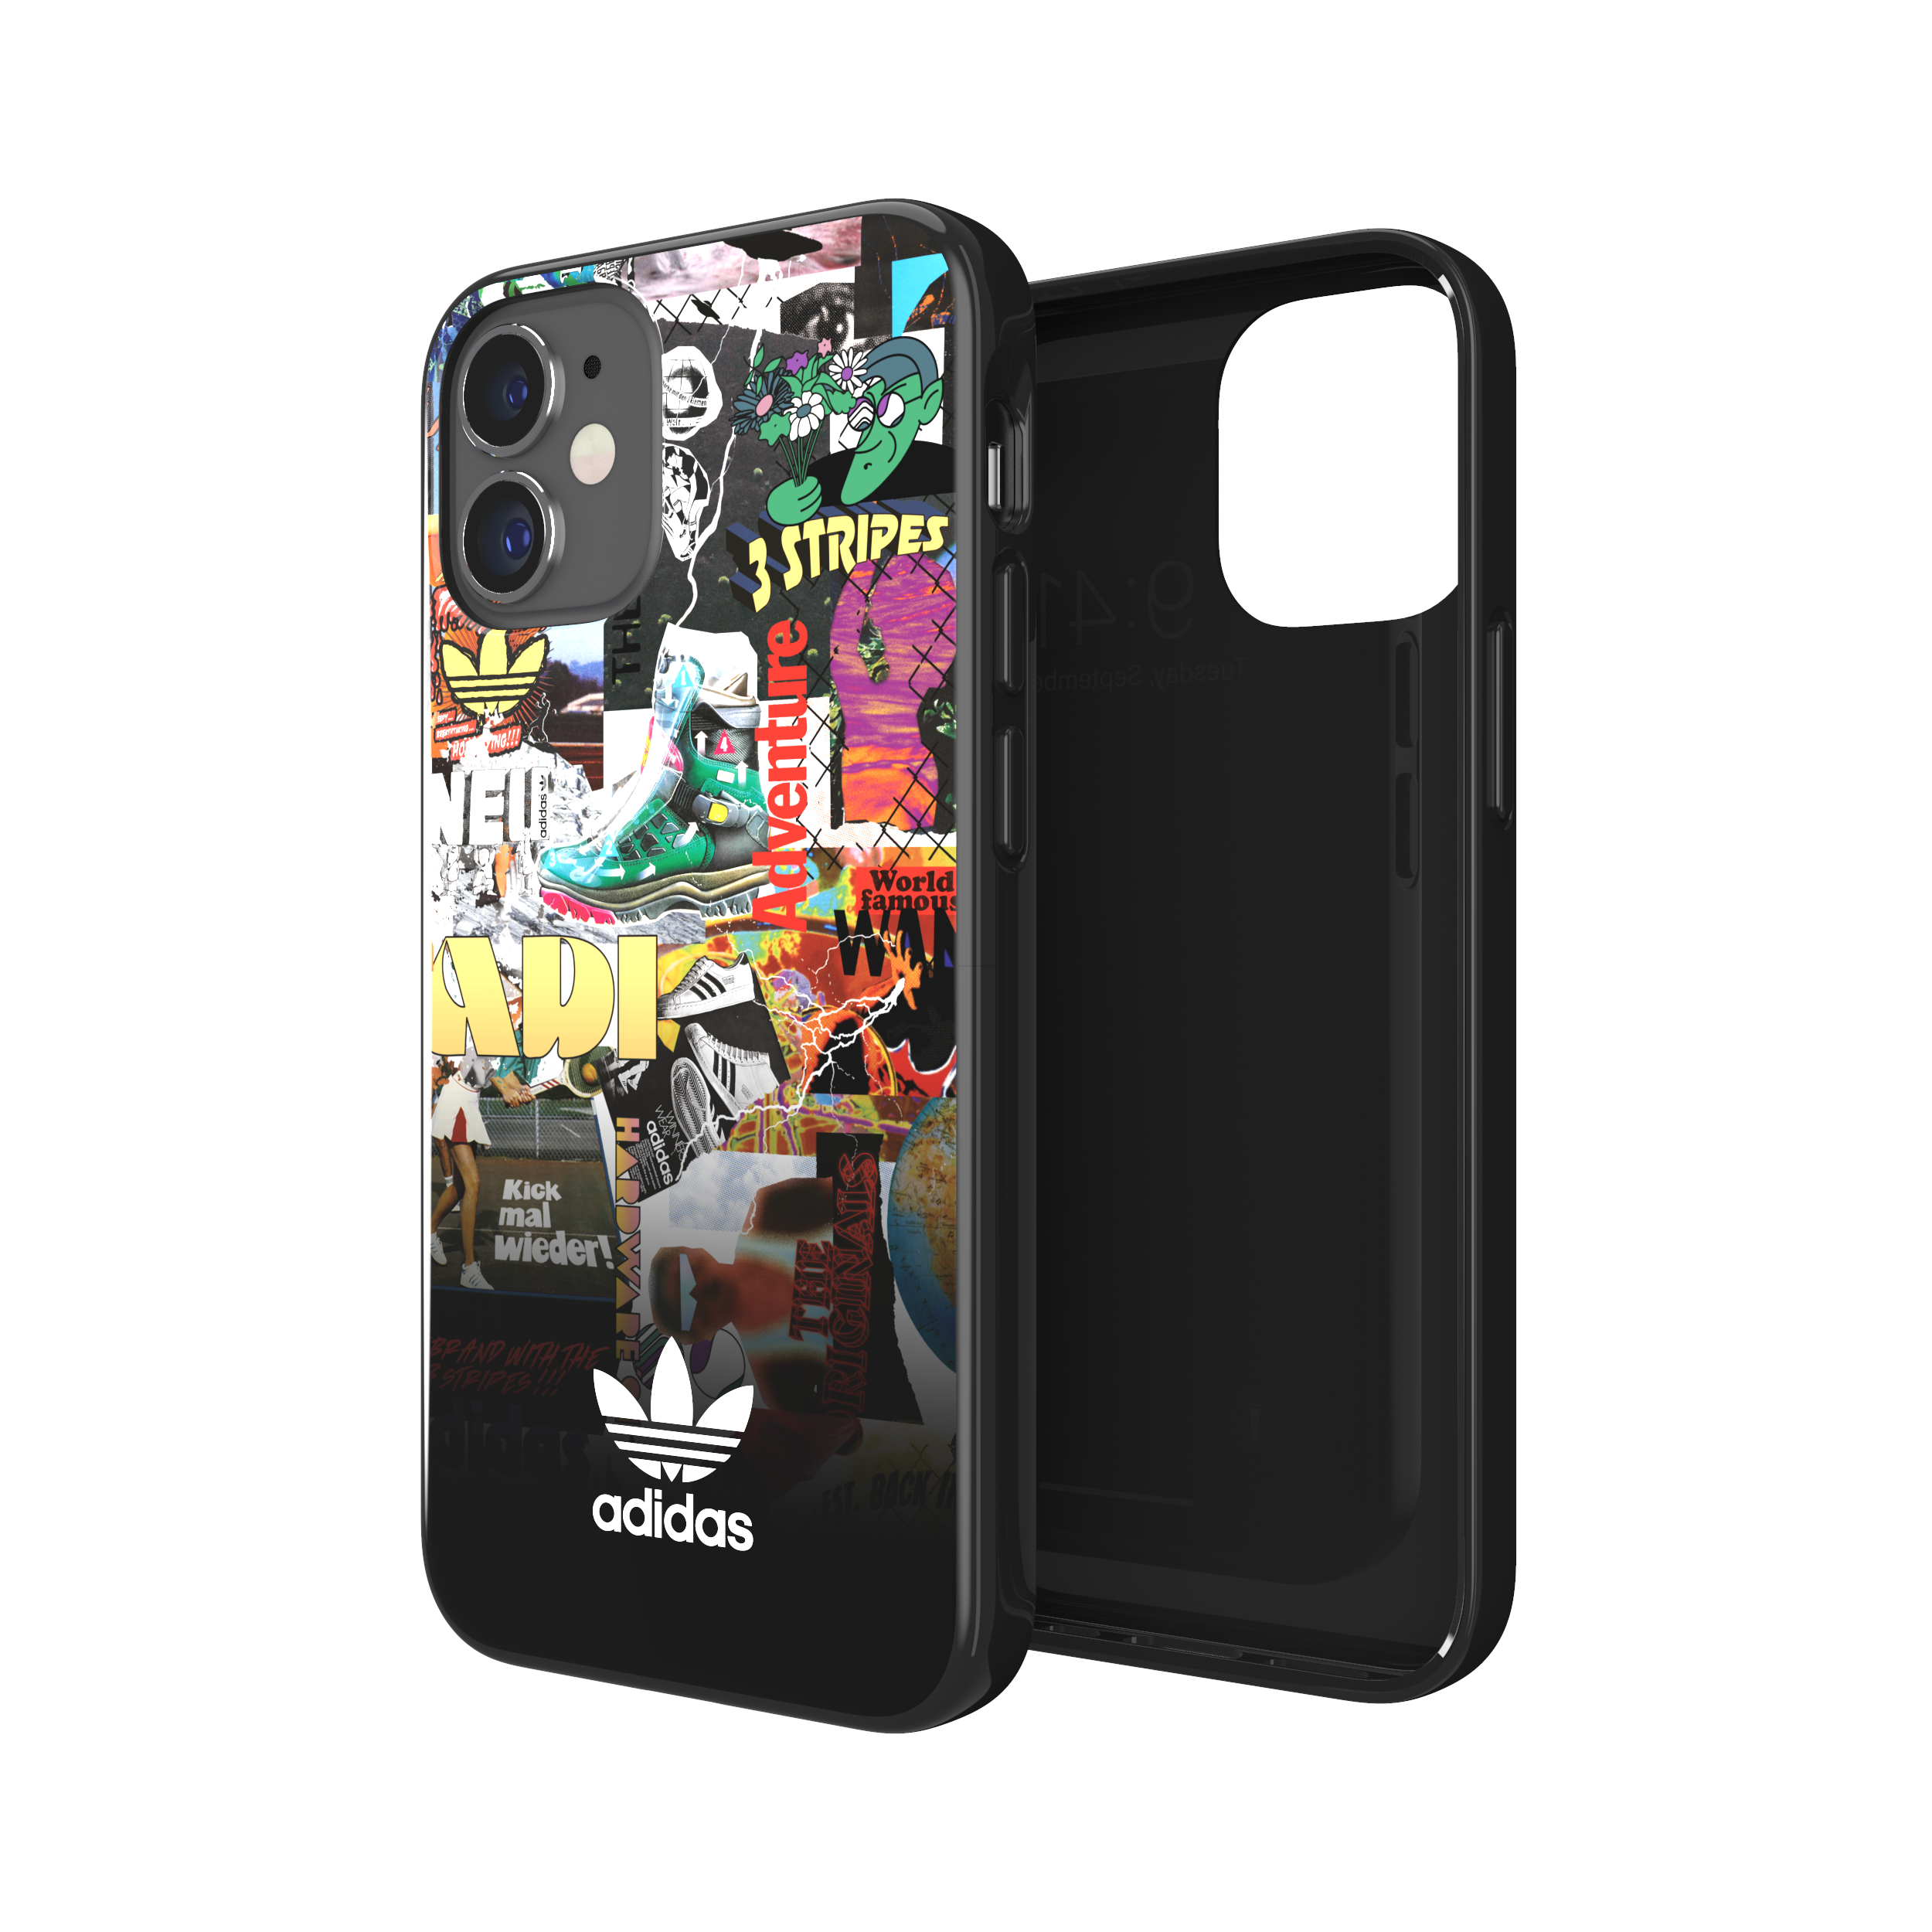 Adidas SNAP Apple iPhone 12 / 12 Pro Graphic Case - Back cover w/ Trefoil Design, Scratch & Drop Protection w/ TPU Bumper, Wireless Charging Compatible - Colourful